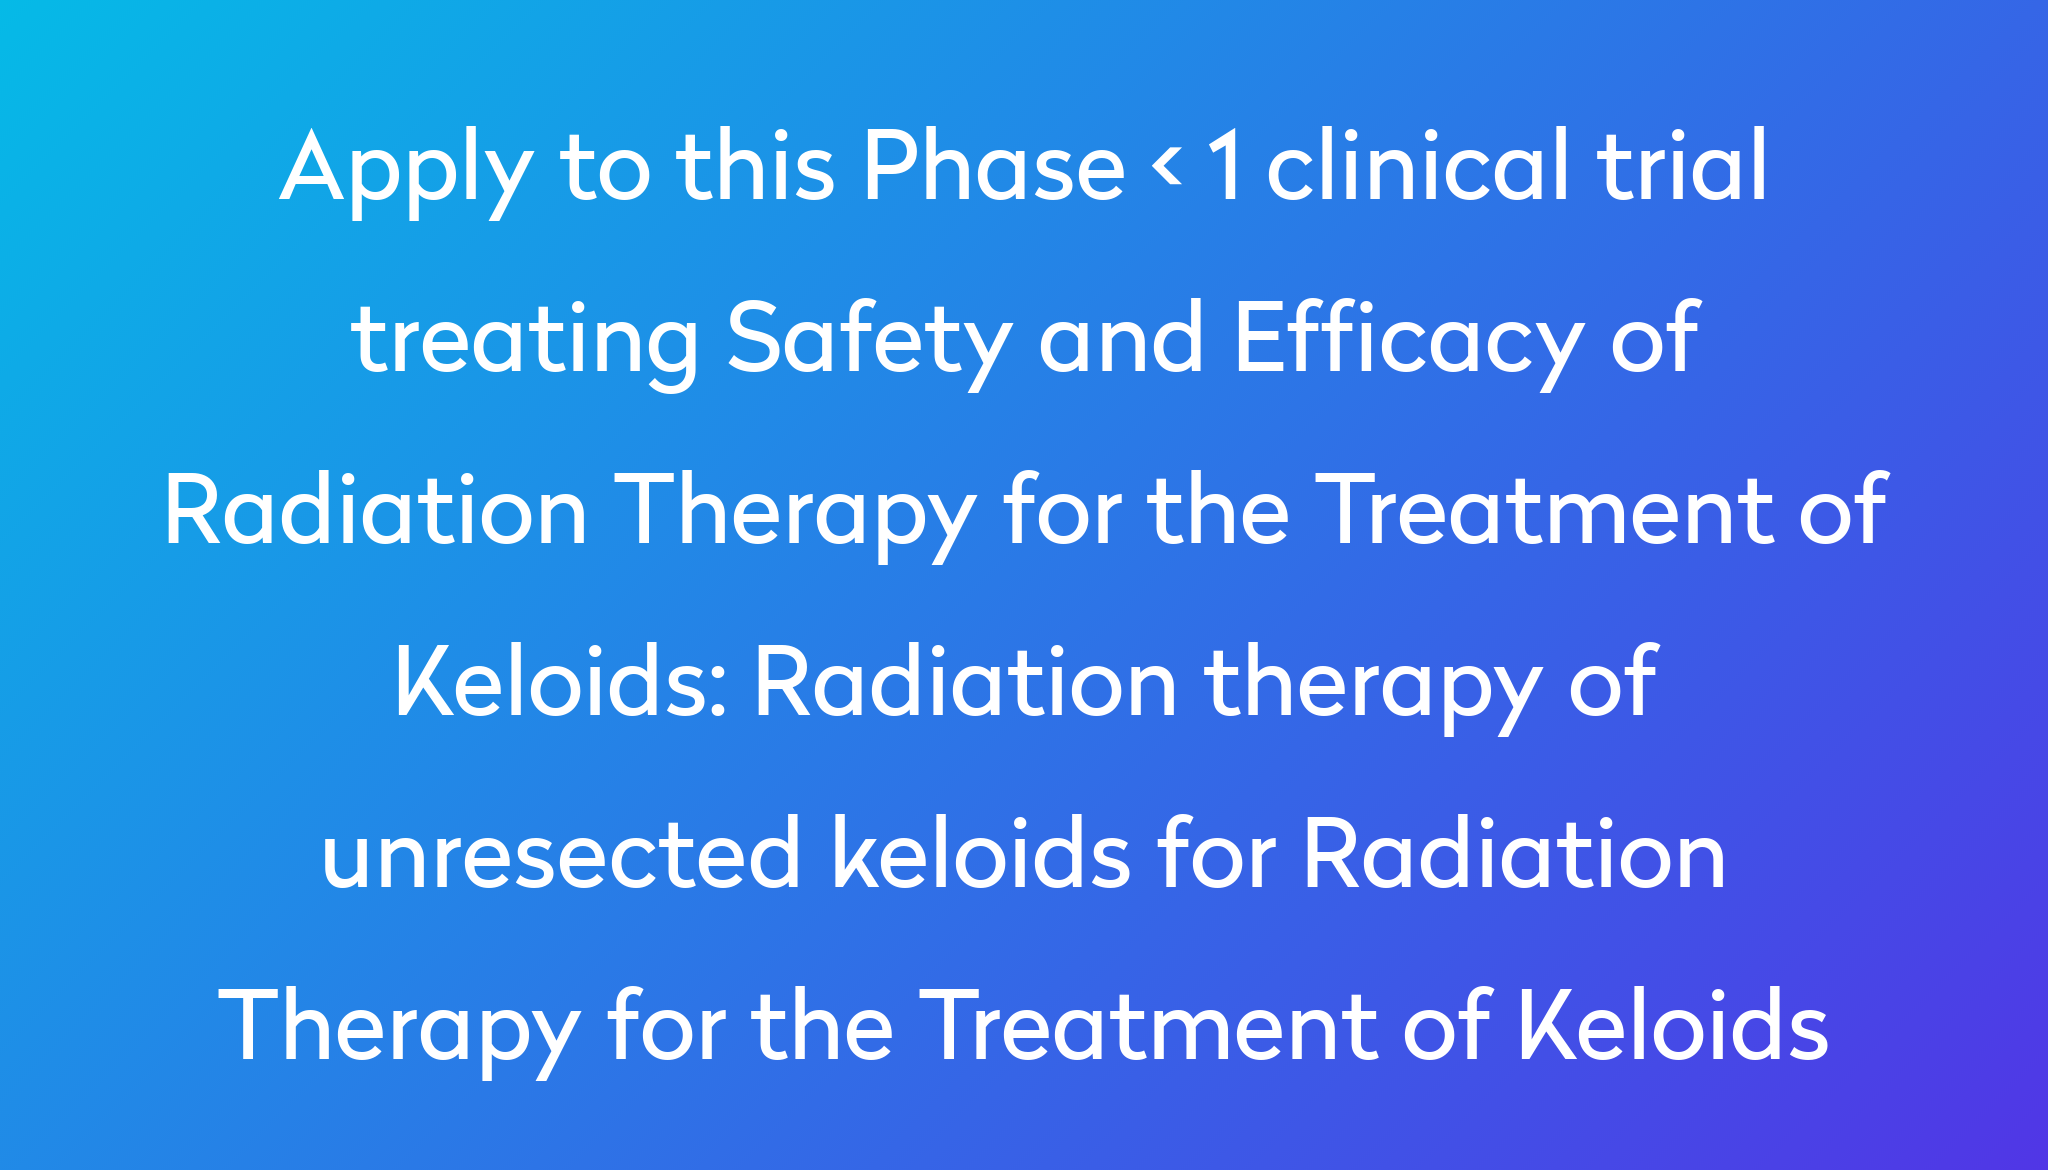 Radiation Therapy Of Unresected Keloids For Radiation Therapy For The